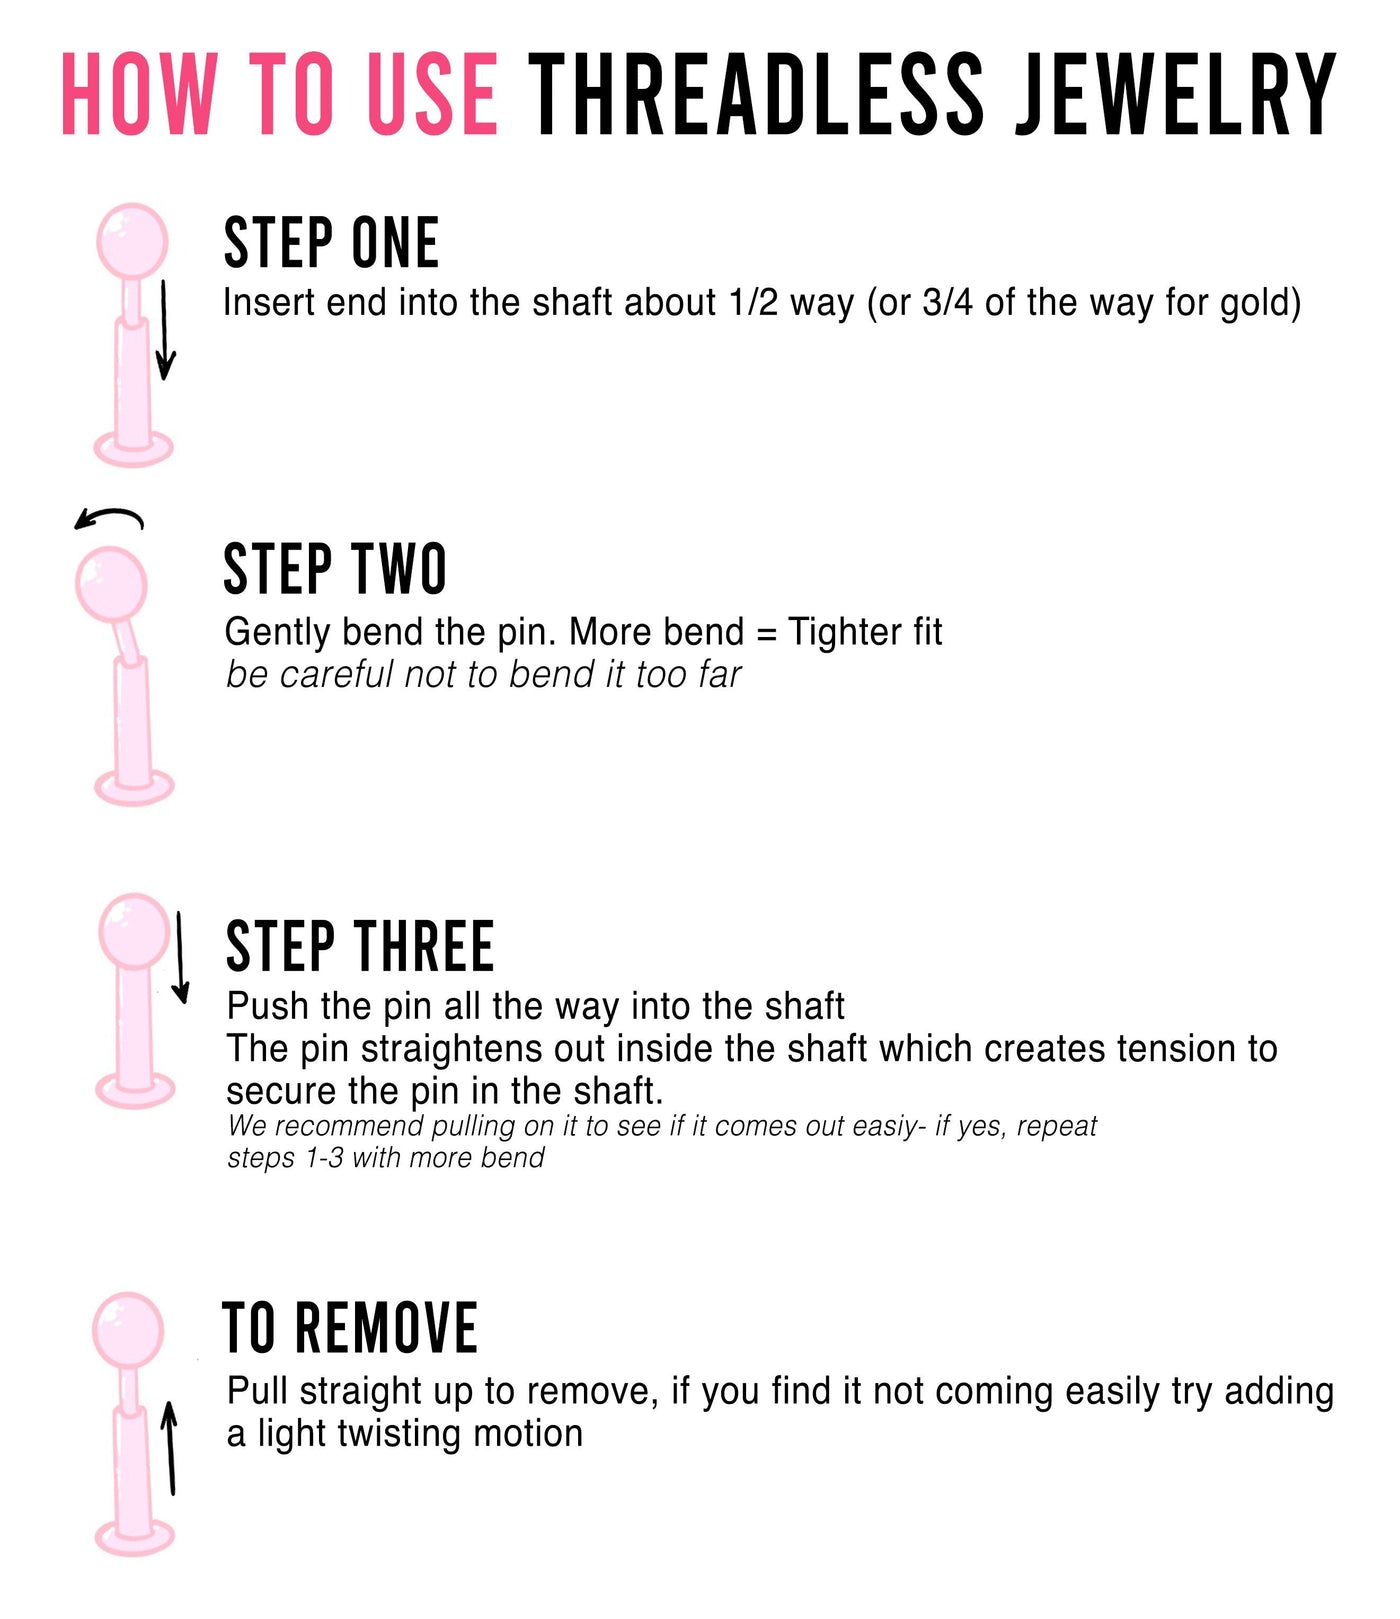 how to remove and use non threaded jewelry